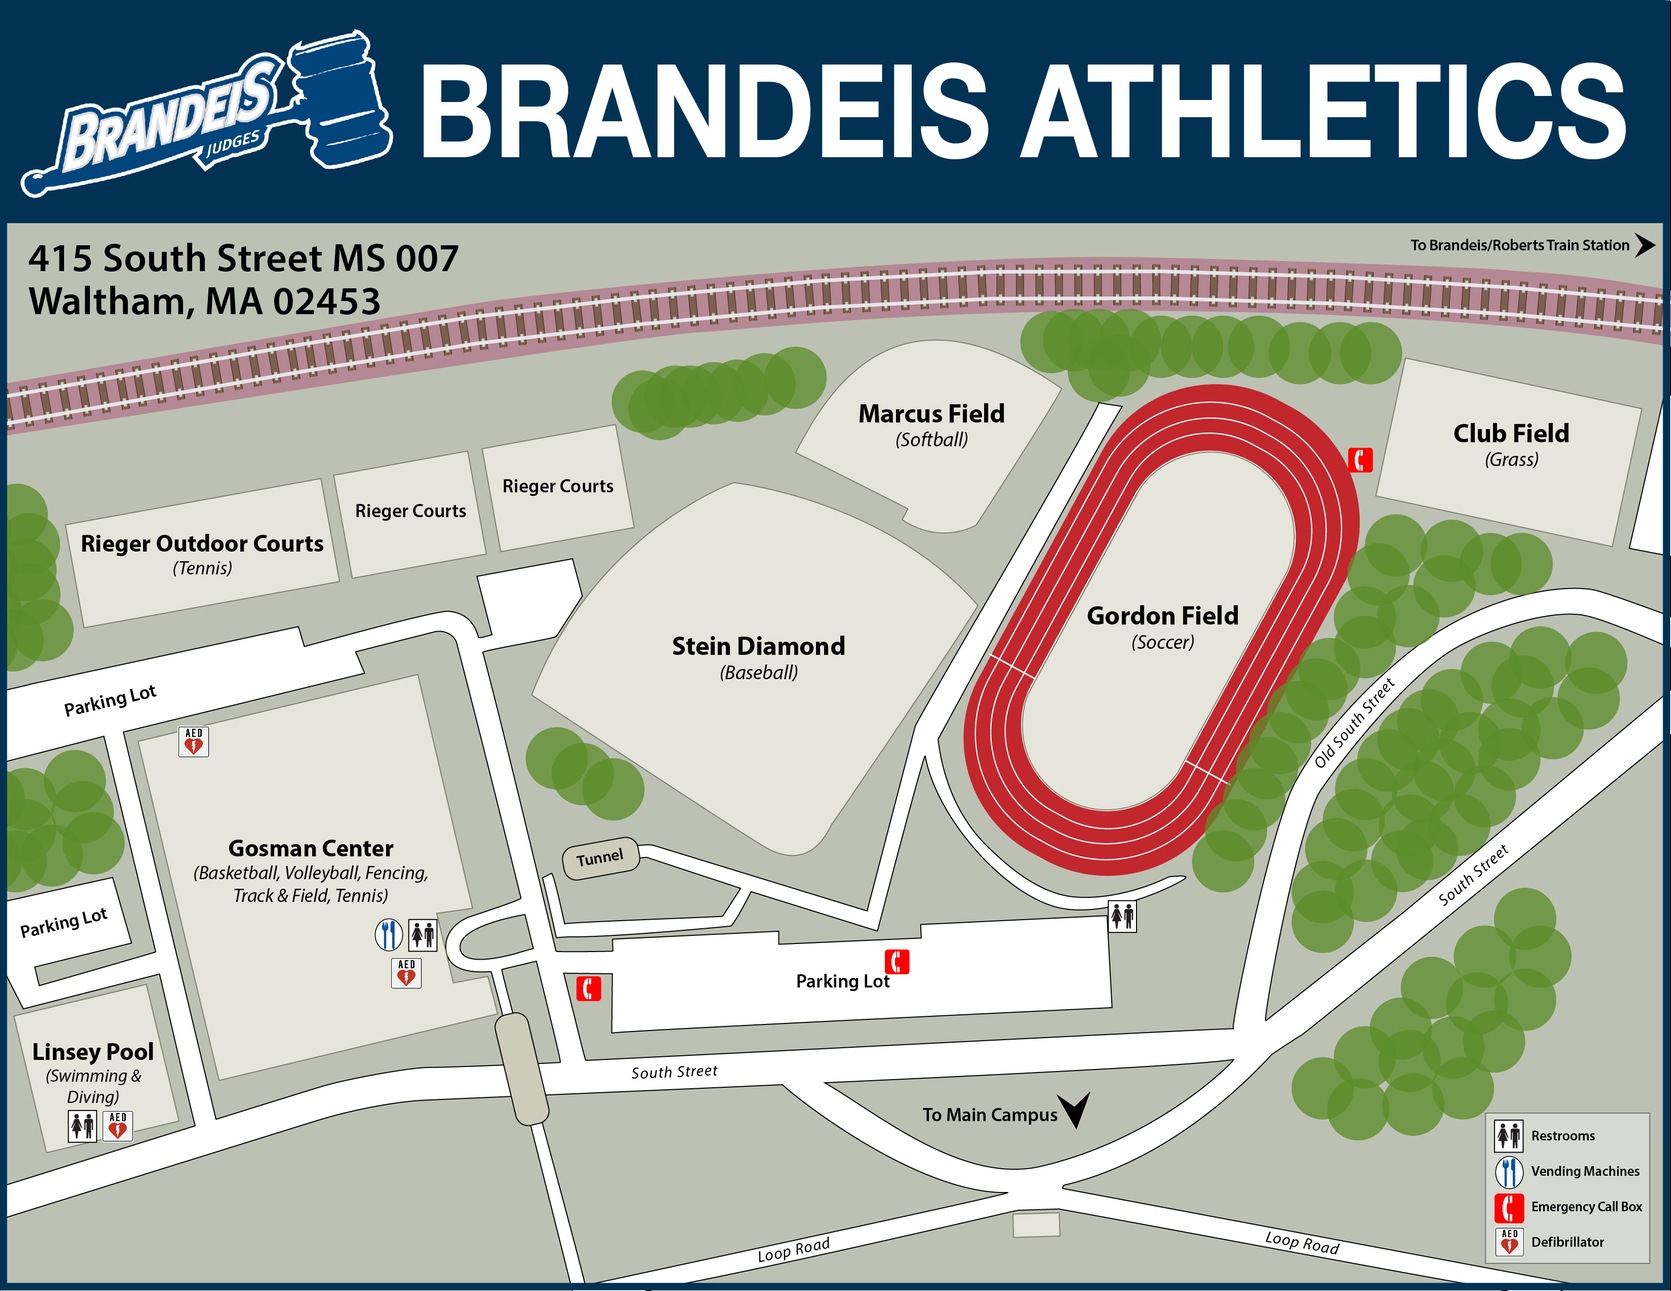 Map of Brandeis Athletics facilities:Gosman Center, Stein Diamond, Gordon Field, Stein Diamond, Rieger Tennis Courts, Linsey Pool, Marcus Field and parking located on the south side of 415 South Street (Brandeis Main Campus), Waltham MA 02453